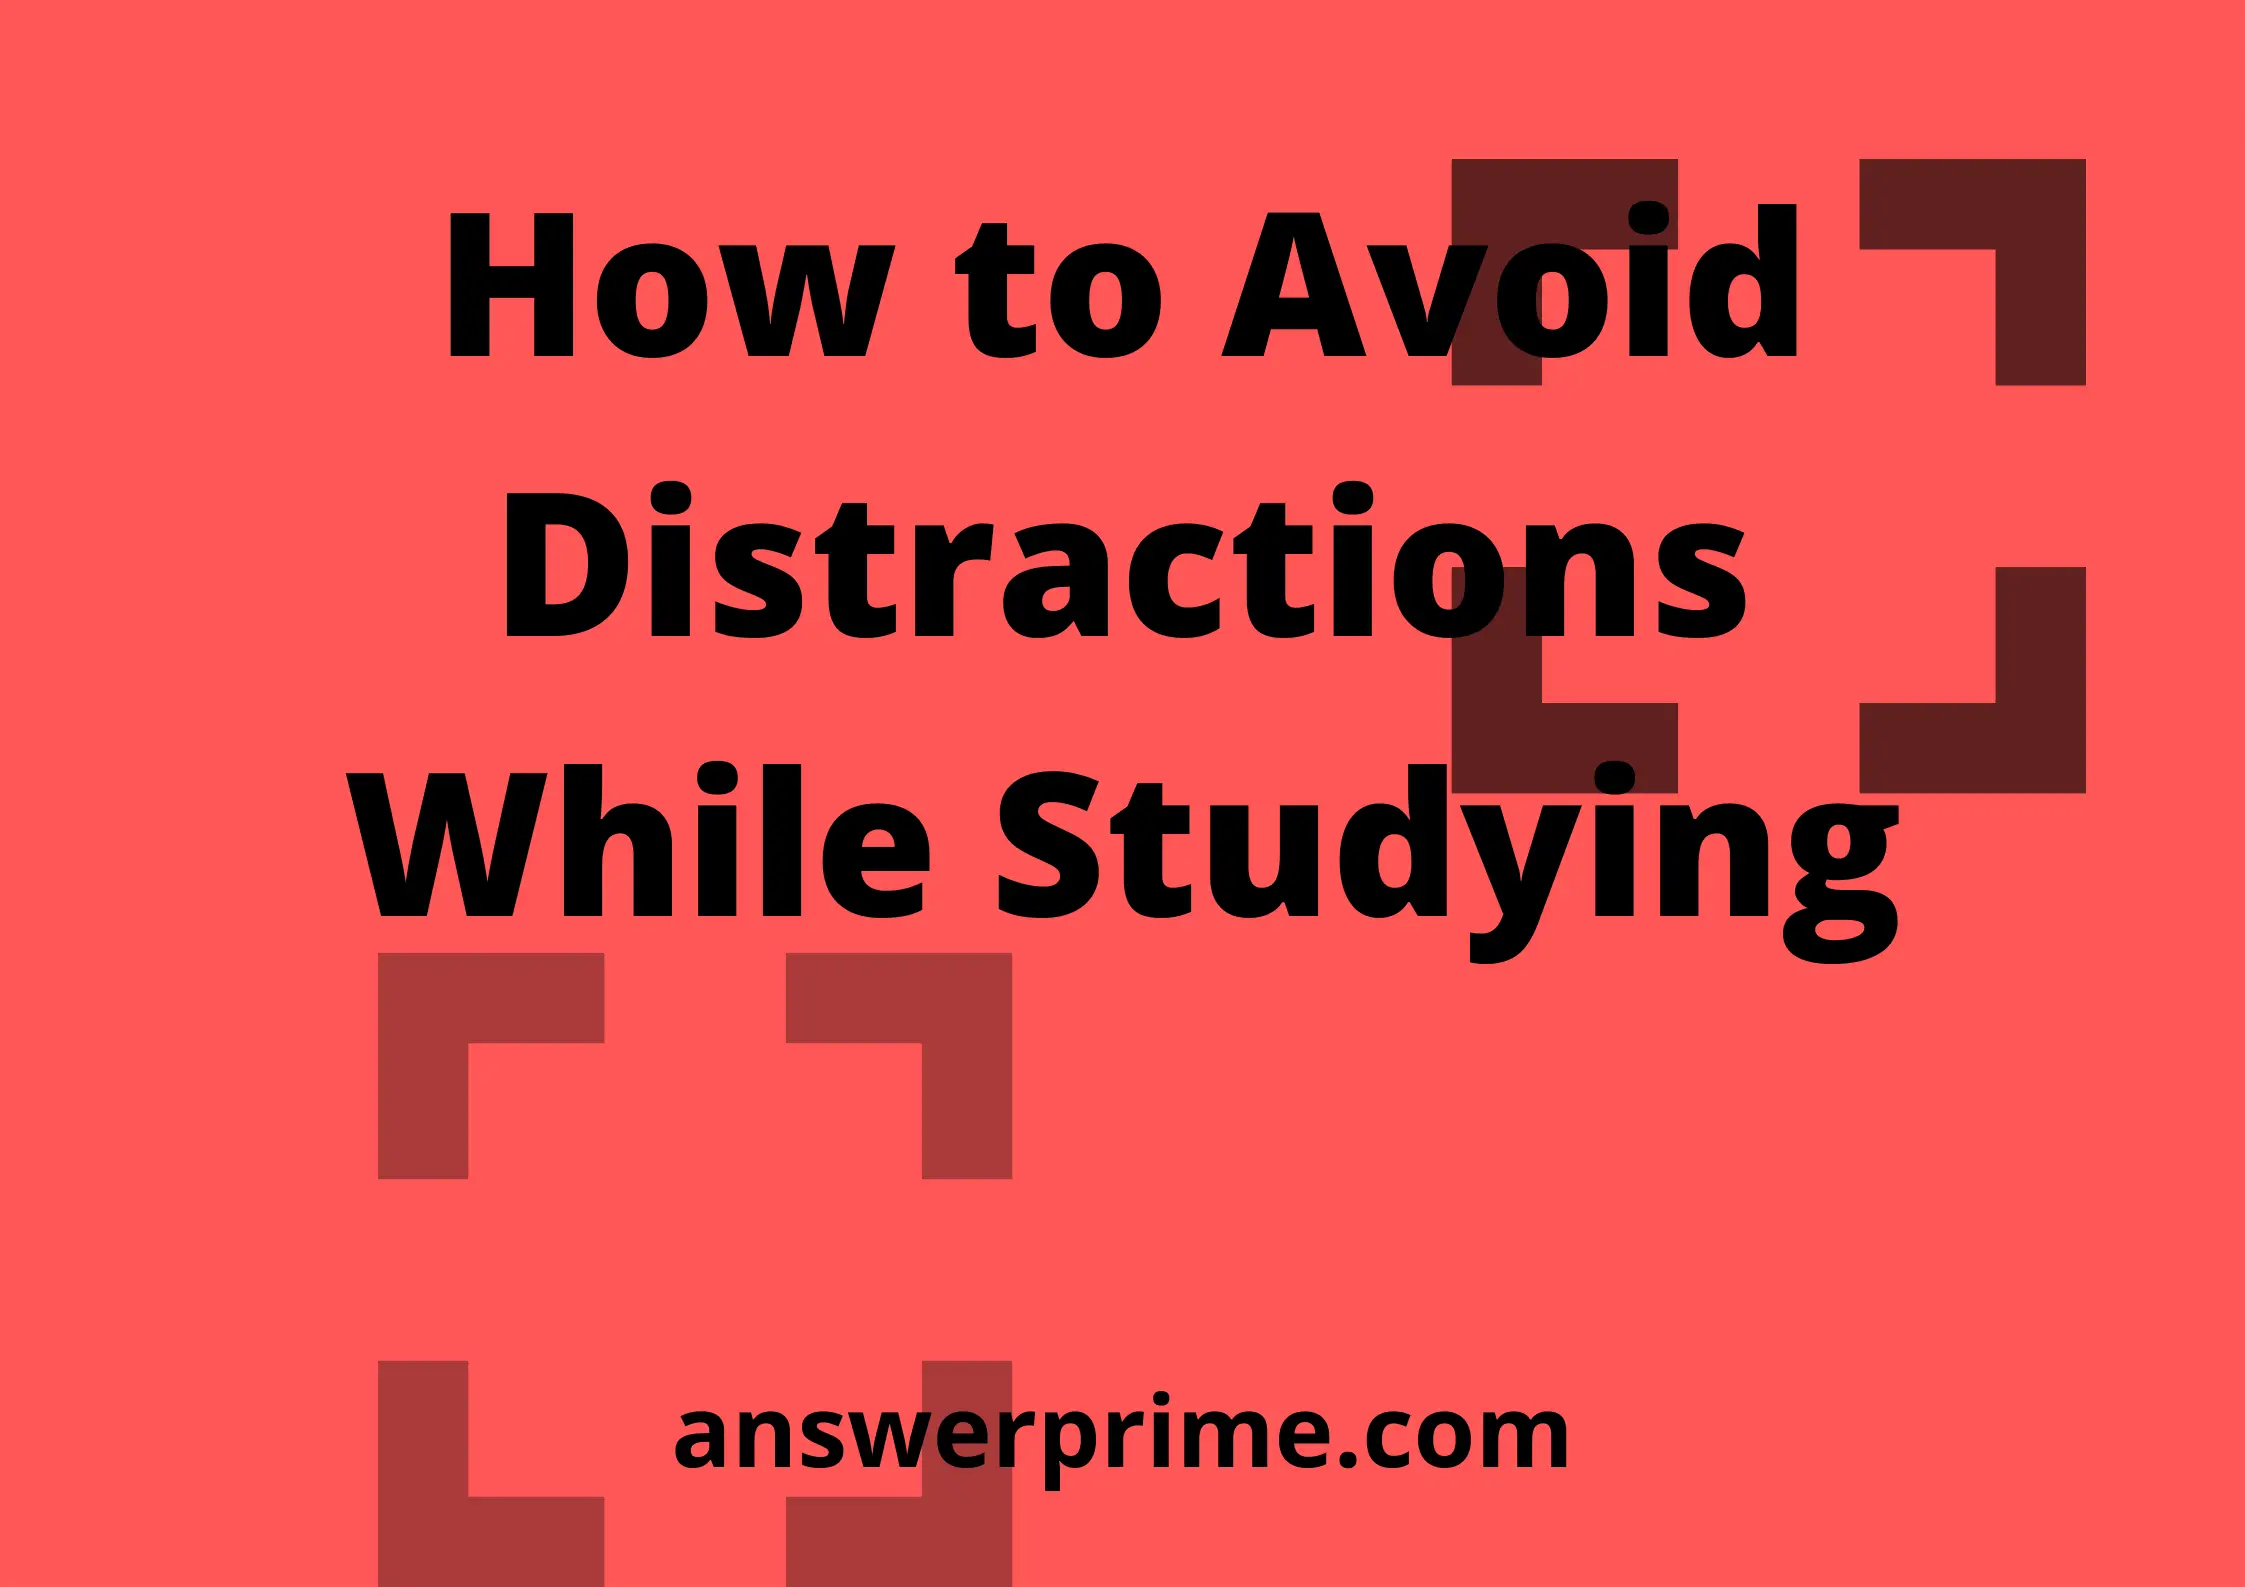 How to Avoid Distractions While Studying